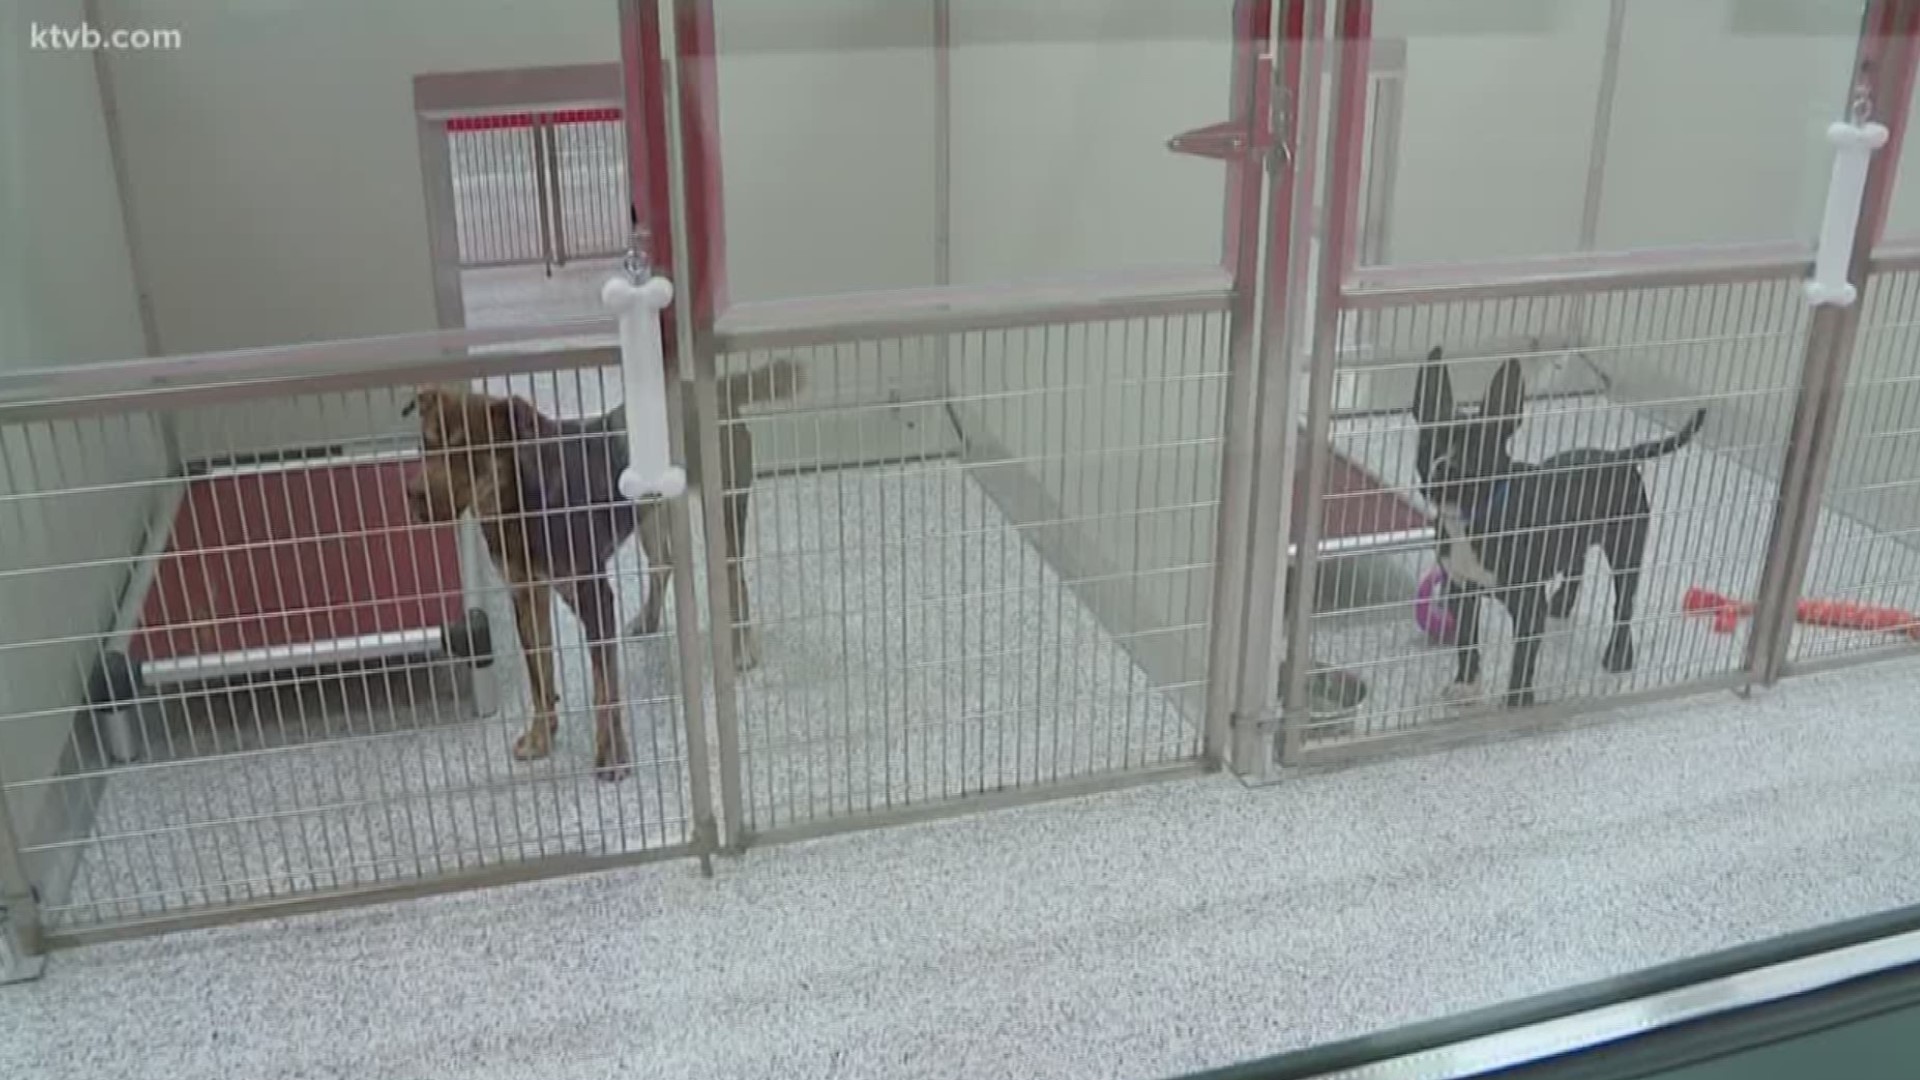 Animals are being moved into their new home. Adoptions will start on Tuesday.